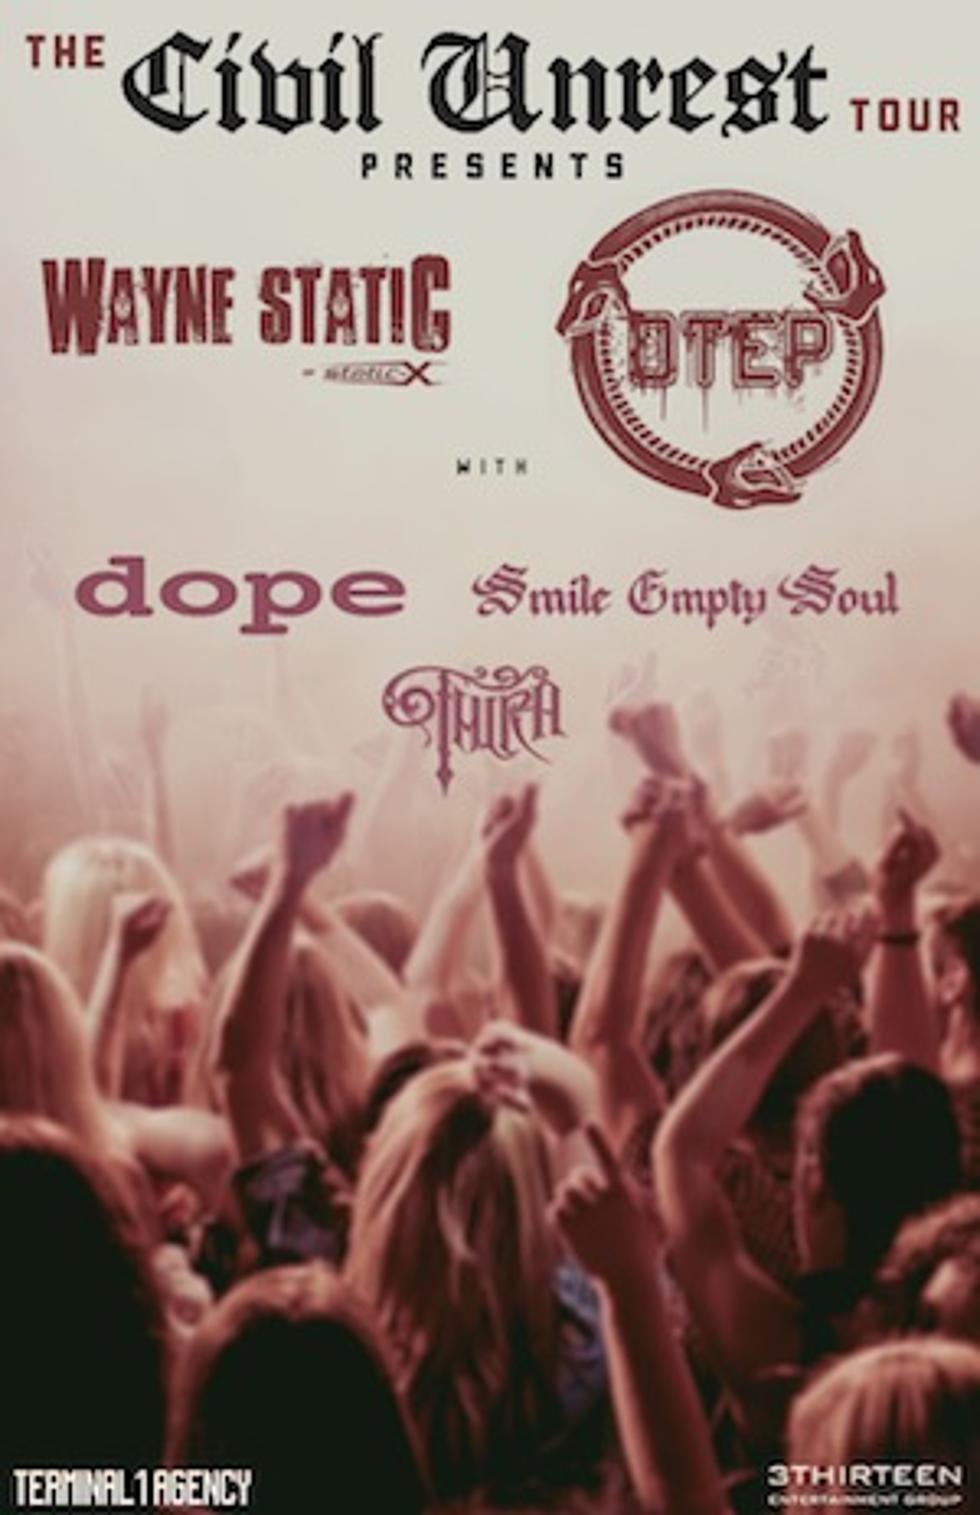 Wayne Static, Smile Empty Soul, Otep and Dope Head Up 2014 &#8216;Civil Unrest Tour&#8217;